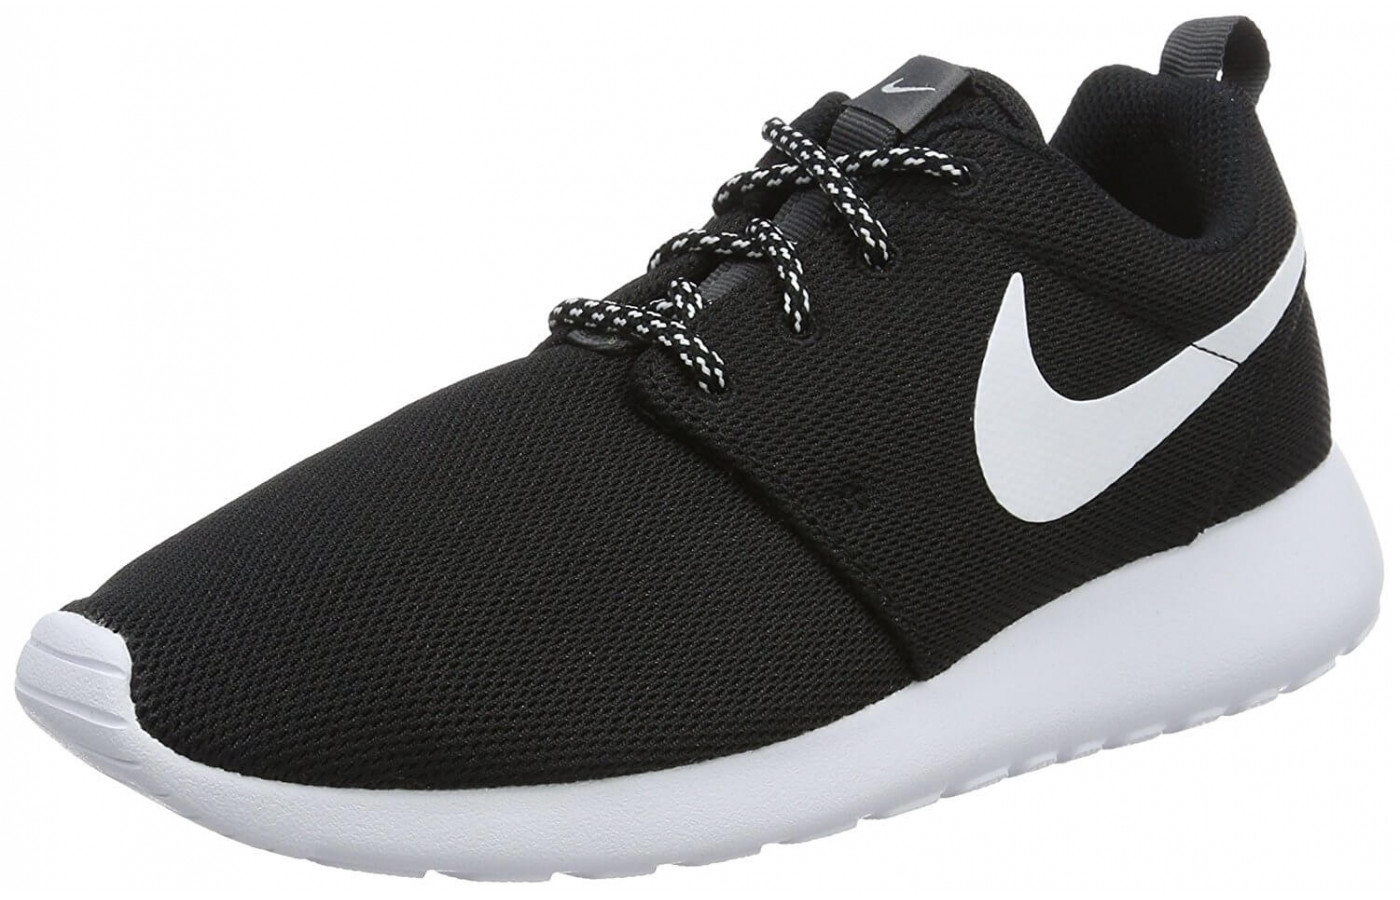 An angled view of the Nike Roshe One.